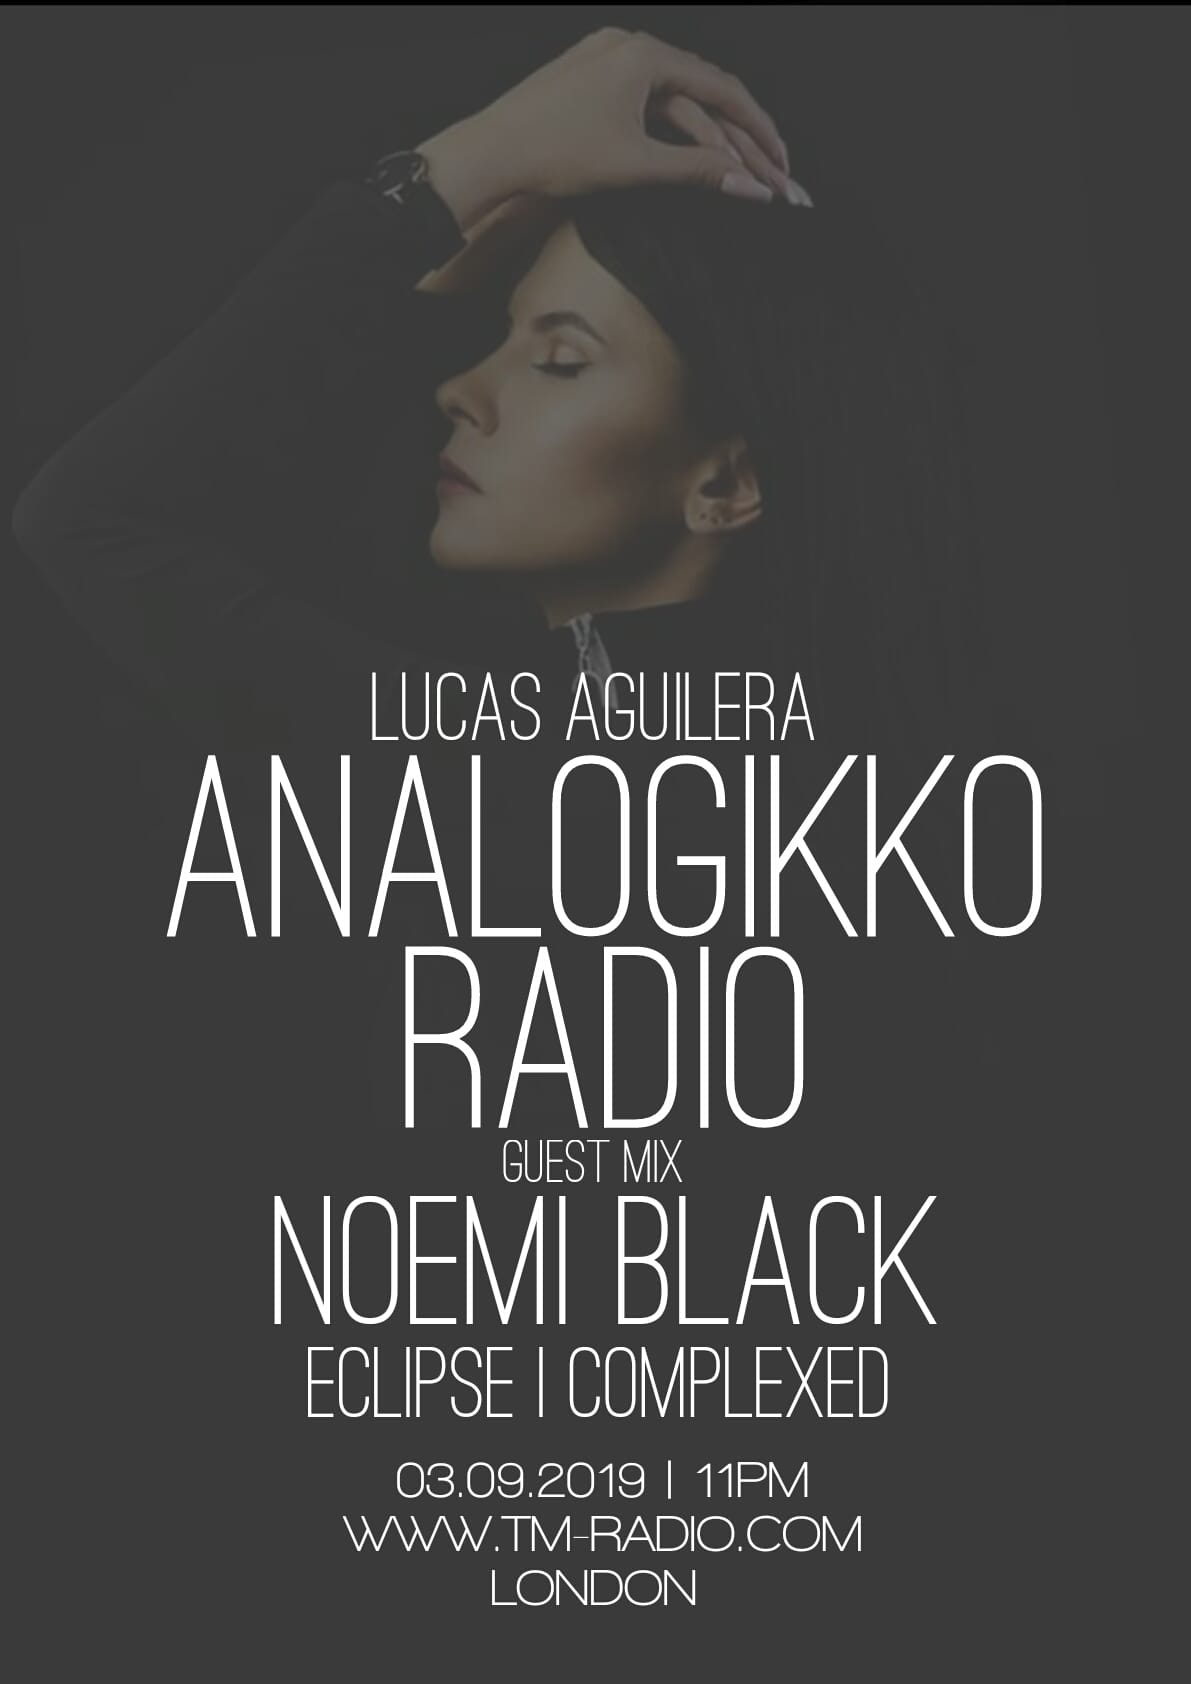 ANALOGIKKO RADIO BY LUCAS AGUILERA - NOEMI BLACK - GUEST MIX - TM RADIO - Episode 052 (from March 8th, 2019)